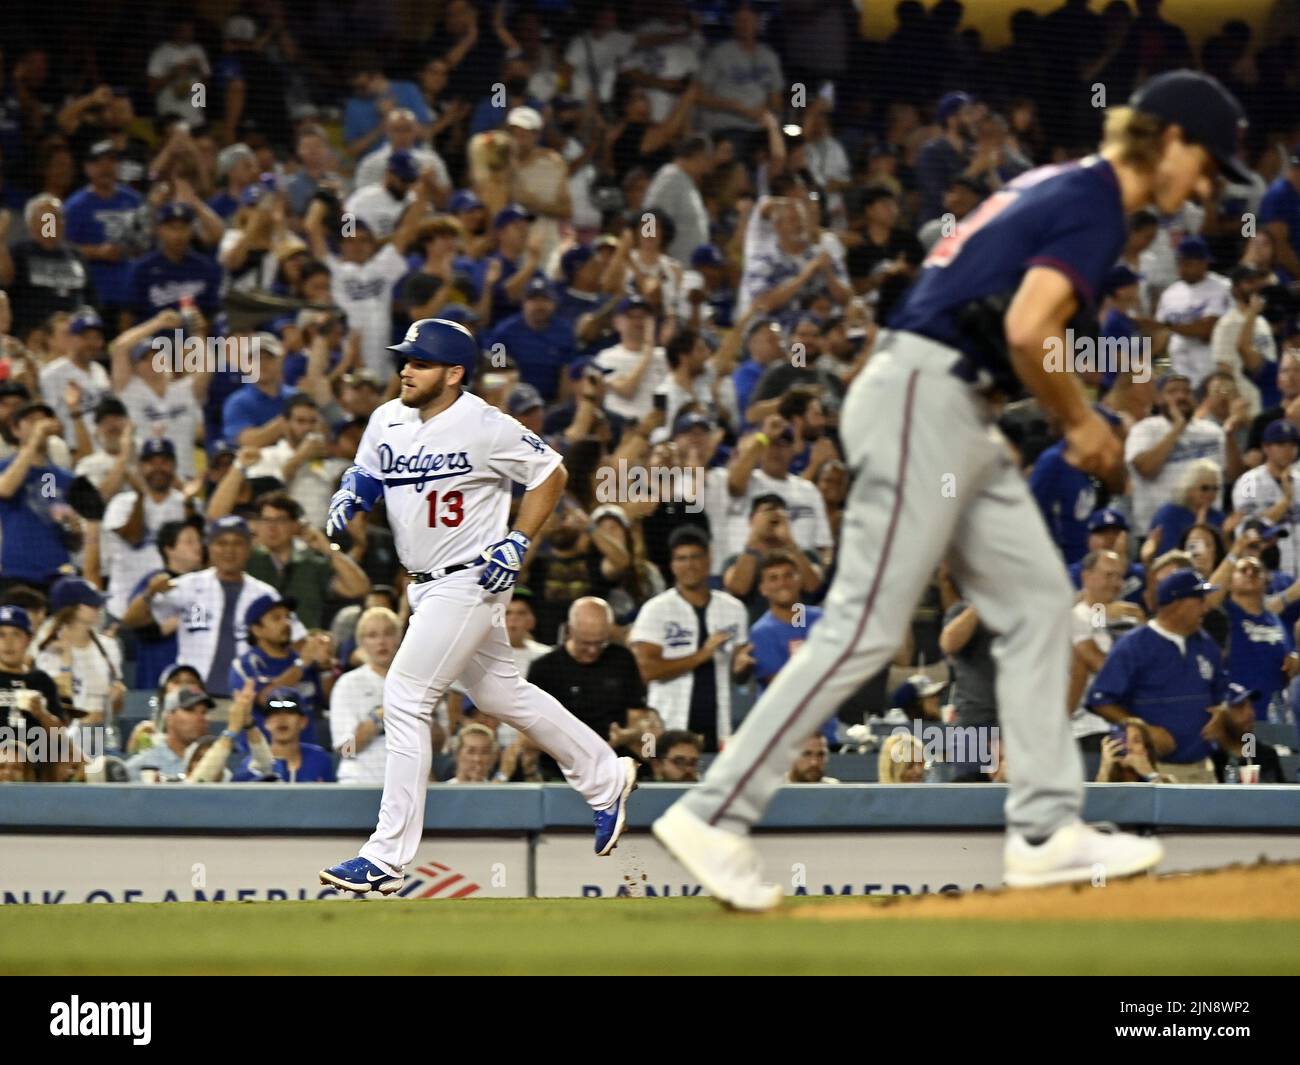 Los Angeles, United States. 10th Aug, 2022. Los Angeles Dodgers Max Muncy rounds the bases after hitting a solo home run to right center off Minnesota Twins starting pitcher Joe Ryan (R) during the fourth inning at Dodger Stadium on Tuesday, August 9, 2022. Photo by Jim Ruymen/UPI Credit: UPI/Alamy Live News Stock Photo